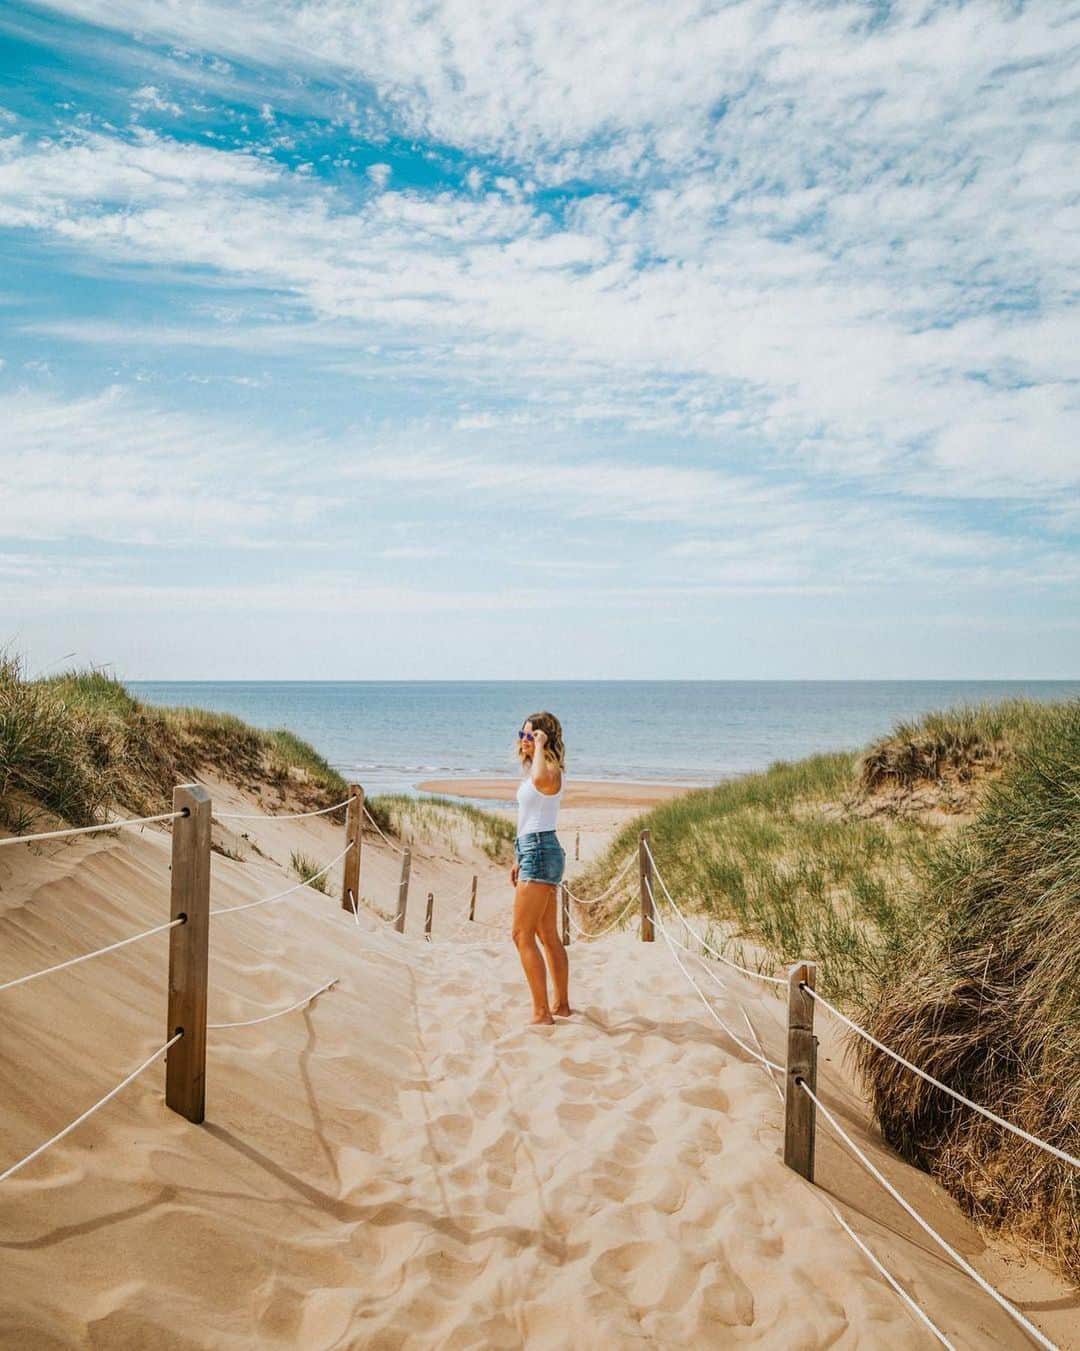 Explore Canadaさんのインスタグラム写真 - (Explore CanadaInstagram)「Today's #CanadaSpotlight is on @tourismpei!⁠⠀ ⁠⠀ Welcome to Prince Edward Island — it may be Canada's smallest province, but it's big on beauty and nothing short of amazing. With over 90 beaches boasting the warmest waters north of Florida, 60 charming lighthouses, and an amazing food and craft beer scene, we're dreaming of the island life! ⁠⠀ ⁠⠀ Head on over to @tourismpei to discover more from afar. Don't forget to check out their recipe posts for some authentic dishes that will bring a taste of PEI to your home! 😋🦞 ⁠⠀ ⁠⠀ #ExploreCanadaFromHome #ForGlowingHearts⁠⠀ ⁠⠀ 📷: ⁠⠀ 1. @teresa.megan⁠⠀ 2 & 3. @alexgdouglas⁠⠀ 4. @mattchisholmm ⁠⠀ 5. @onthecoastns⁠⠀ 6. @tourismpei/Paul Baglole⁠⠀ 7. @pravakar.thapa⁠⠀ 8. @ryanfloodphoto⁠⠀ ⁠⠀ 📍: @tourismpei⁠⠀ ⁠⠀ #ExplorePEI」5月7日 0時41分 - explorecanada